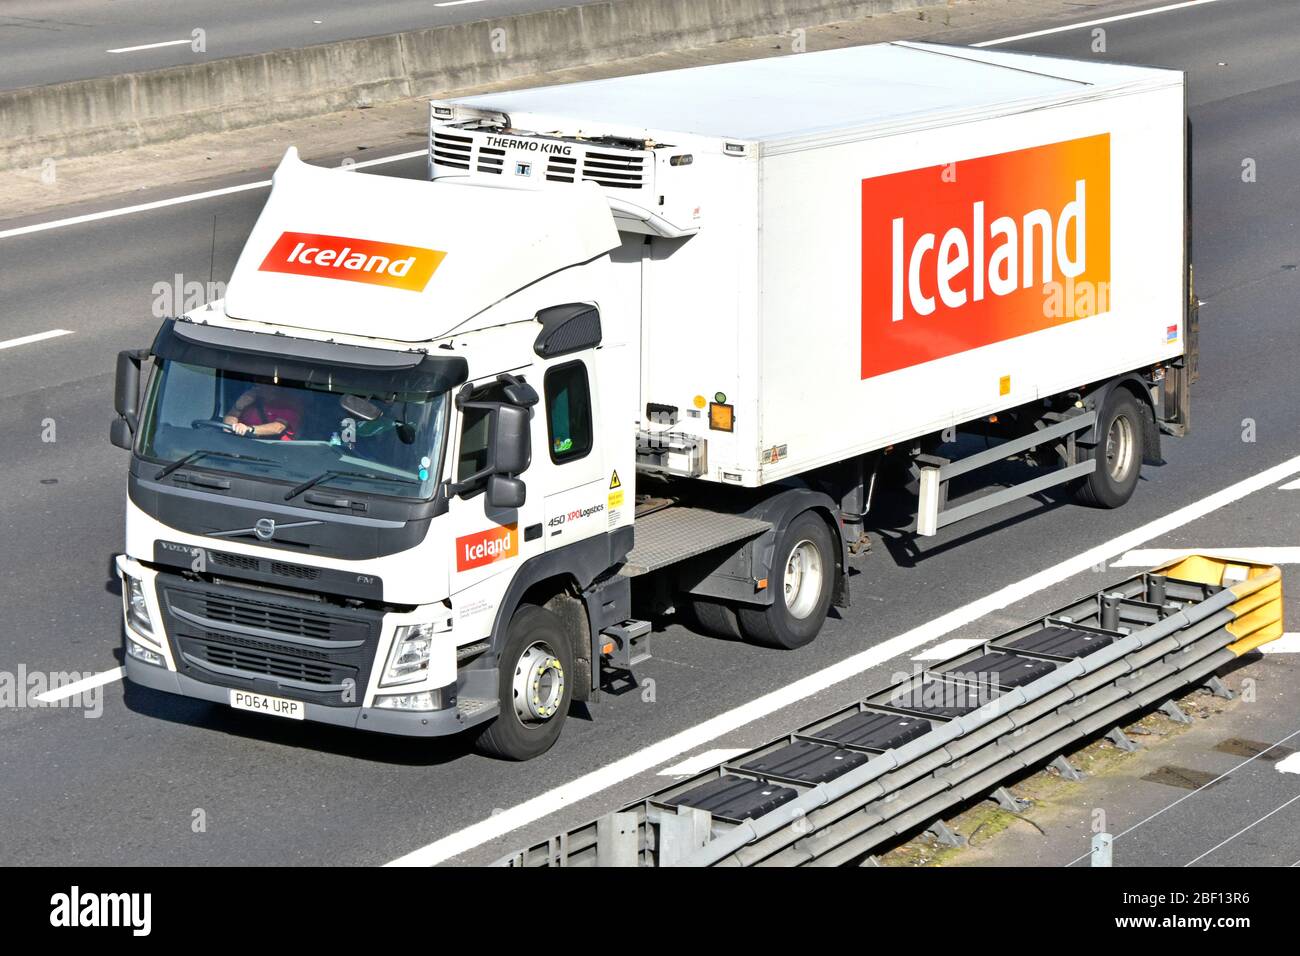 Iceland frozen foods & groceries business food supply chain delivery lorry  truck & short wheelbase trailer Thermo King chiller cooler unit UK motorway  Stock Photo - Alamy